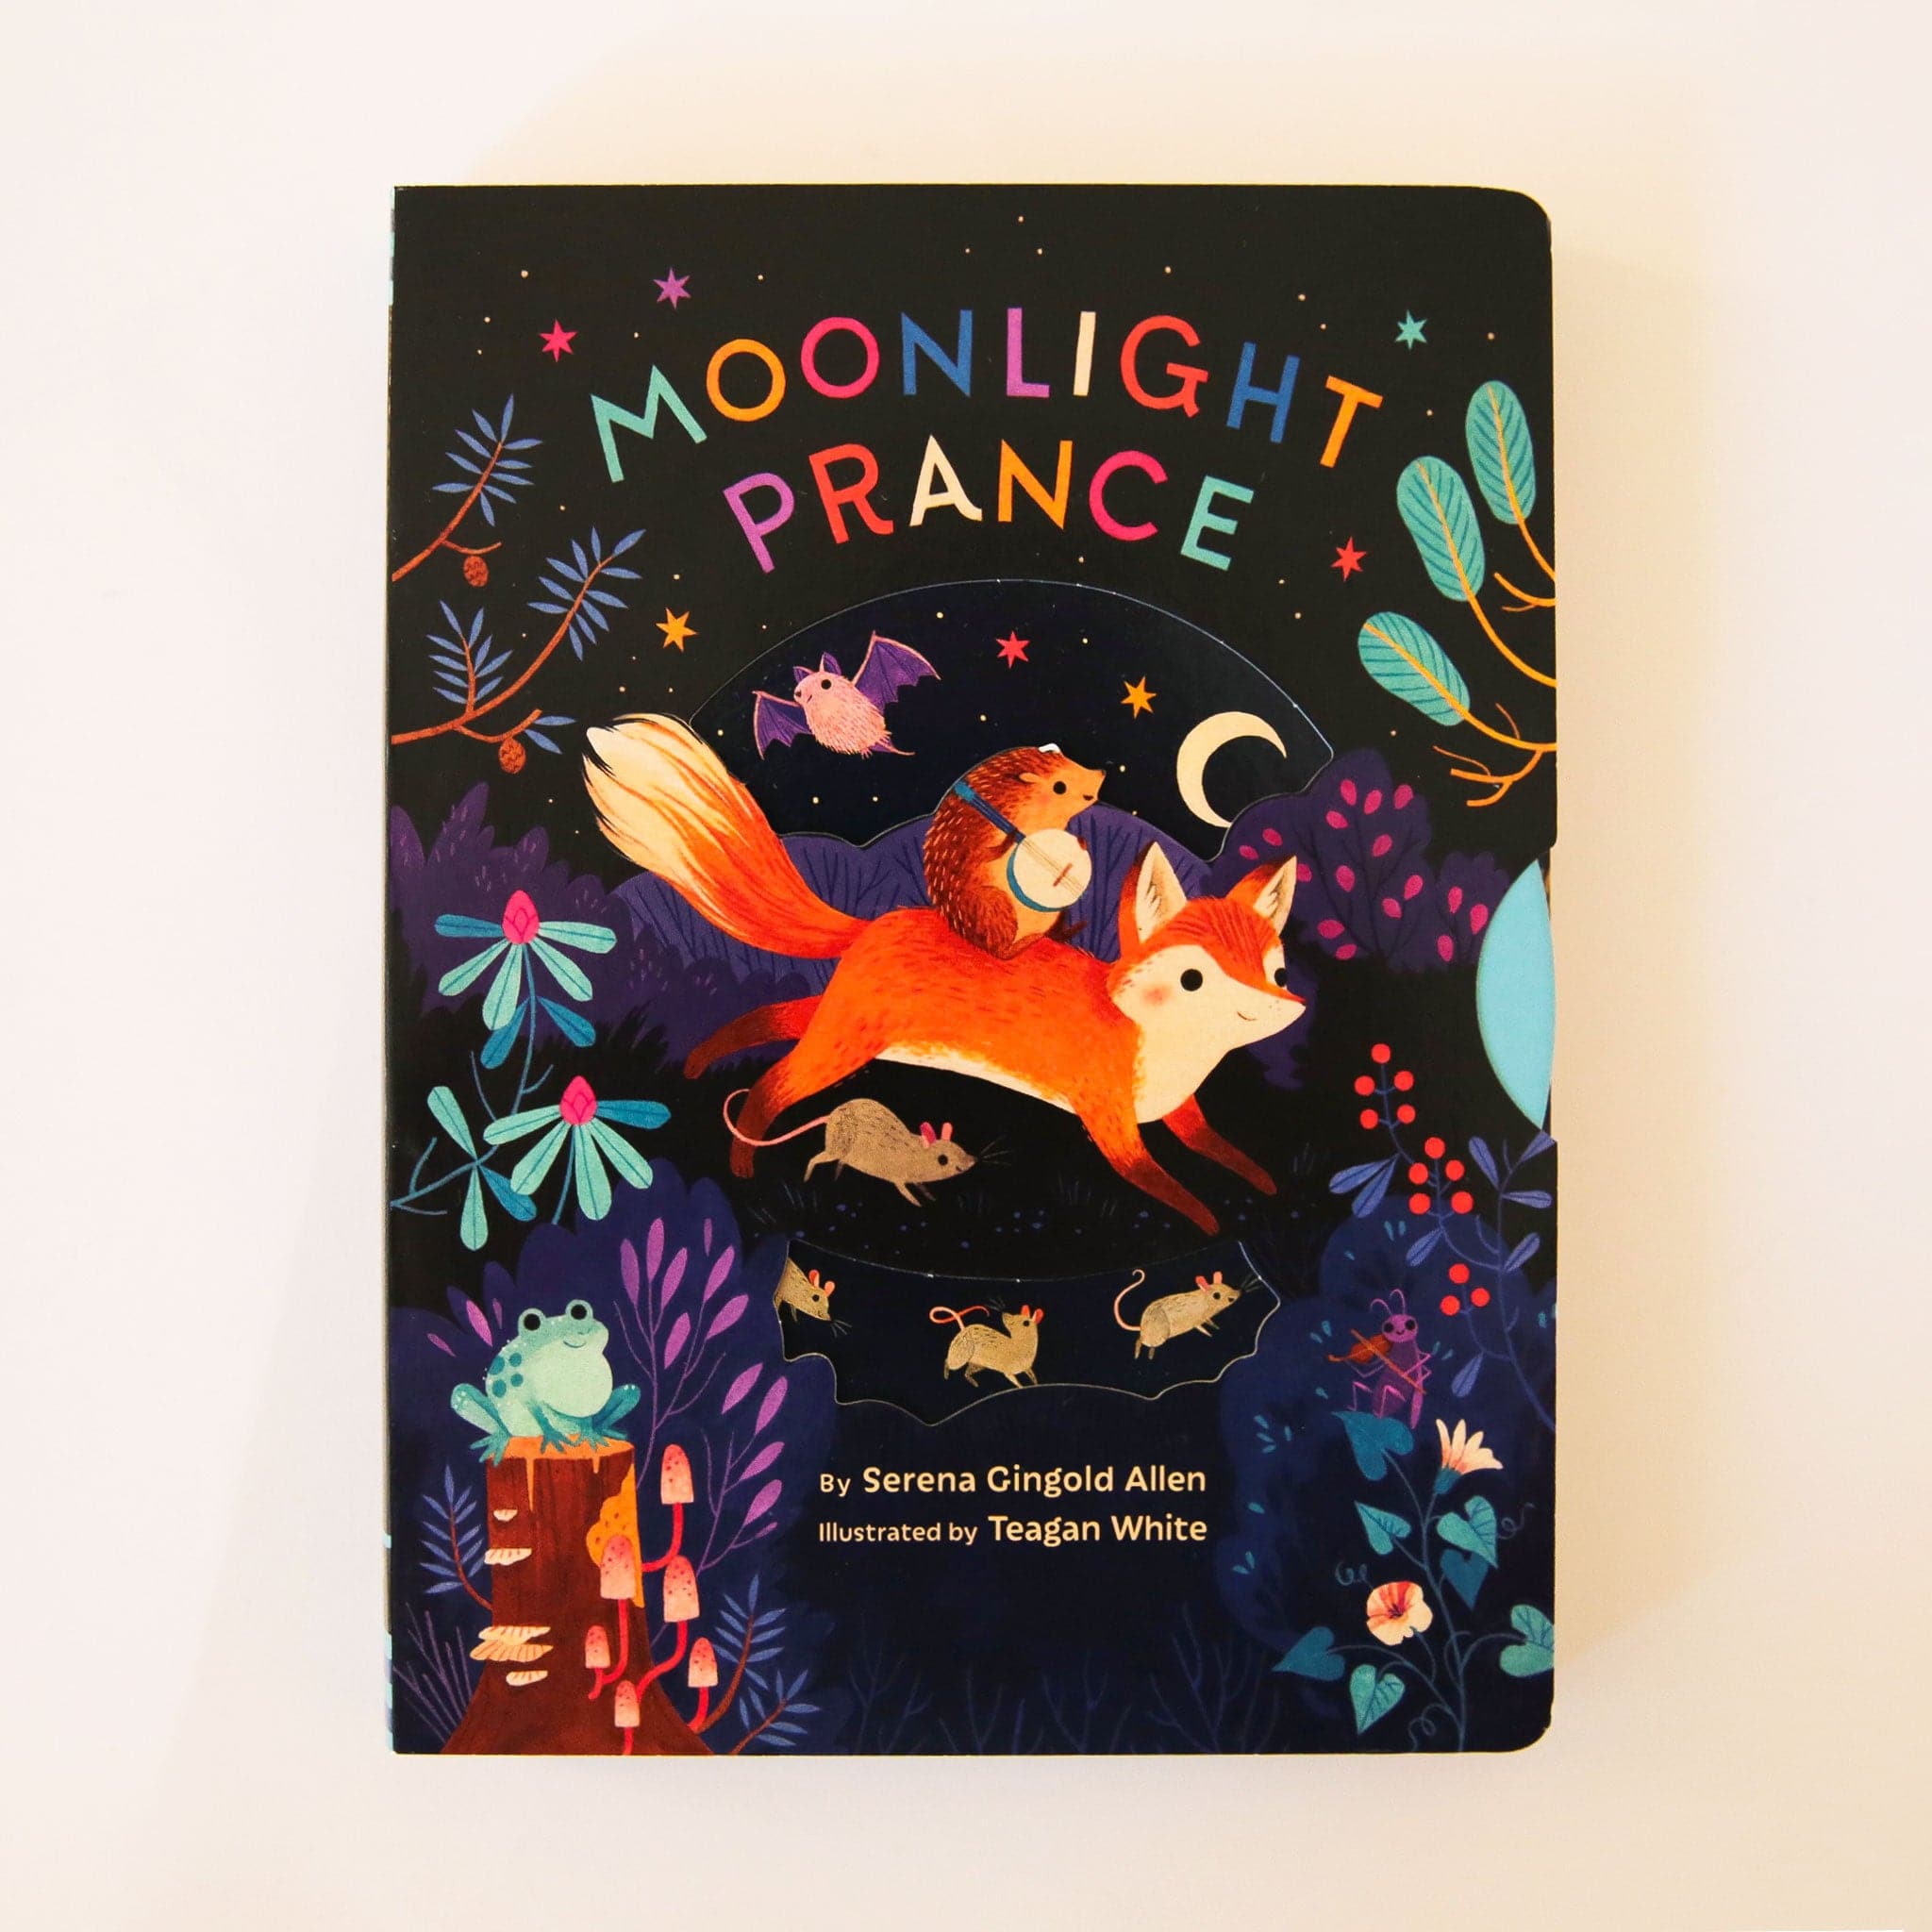 Hard cover children&#39;s book titles &#39;Moonlight Prance&#39; in colorful capital lettering. Below is a woodland scene of various animals dancing around in the moonlight. Animals include a smiling fox, banjo playing hedgehog, mice and more. The background of the cover is solid black and accented with colorful star detailing. 